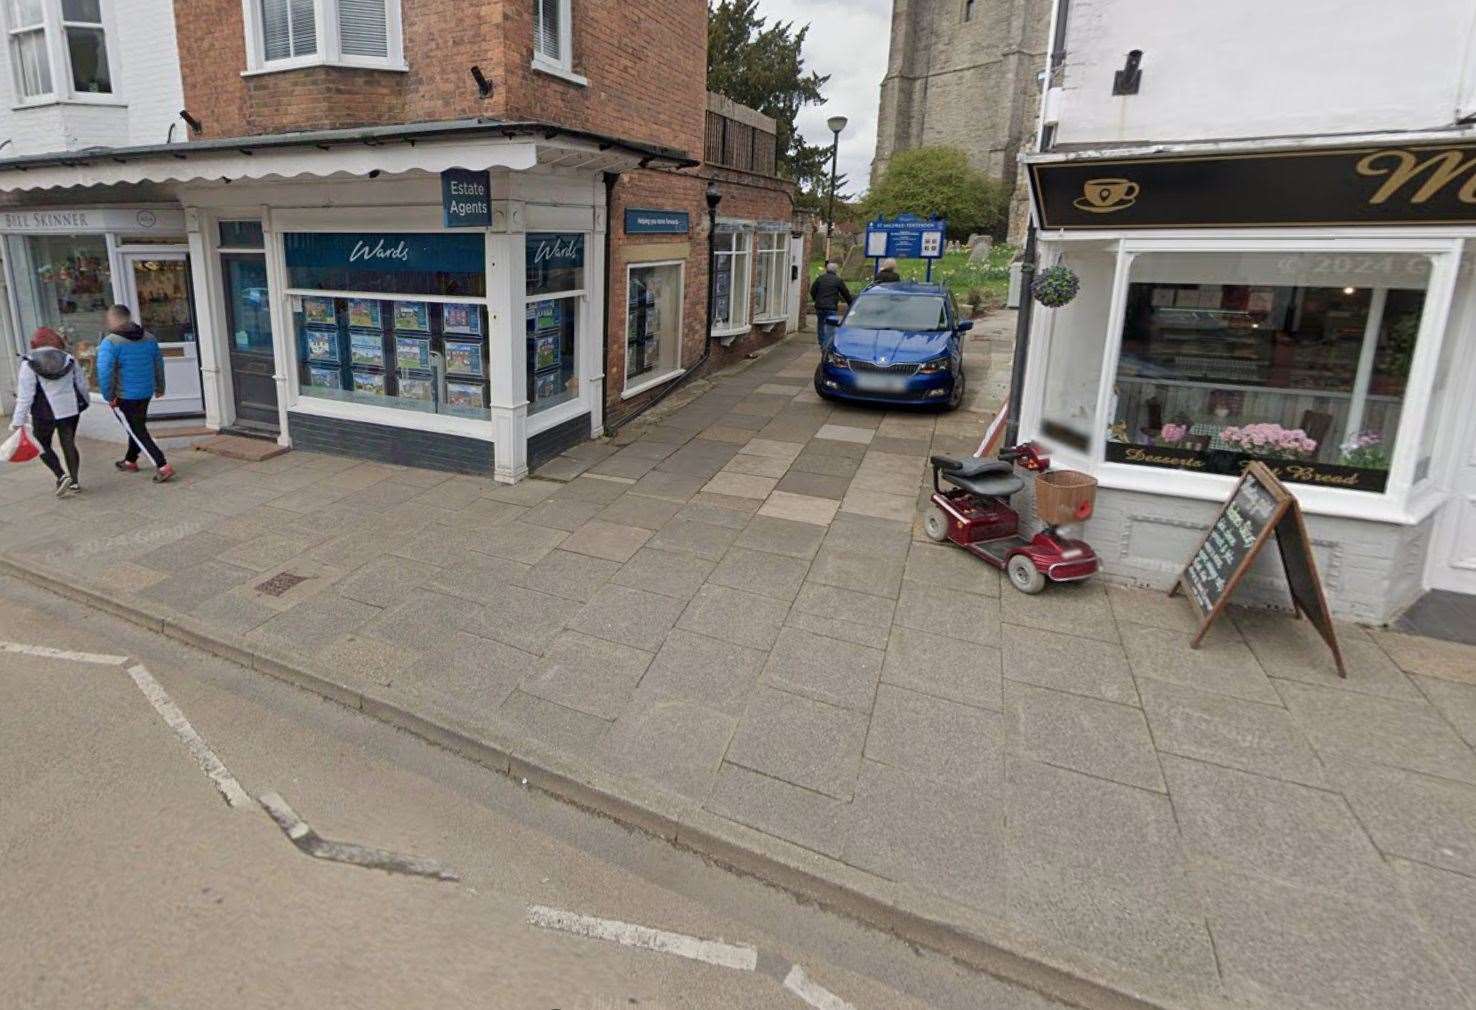 The limo was parked partially over zig zag lines in Tenterden High Street, near the church. Picture: Google